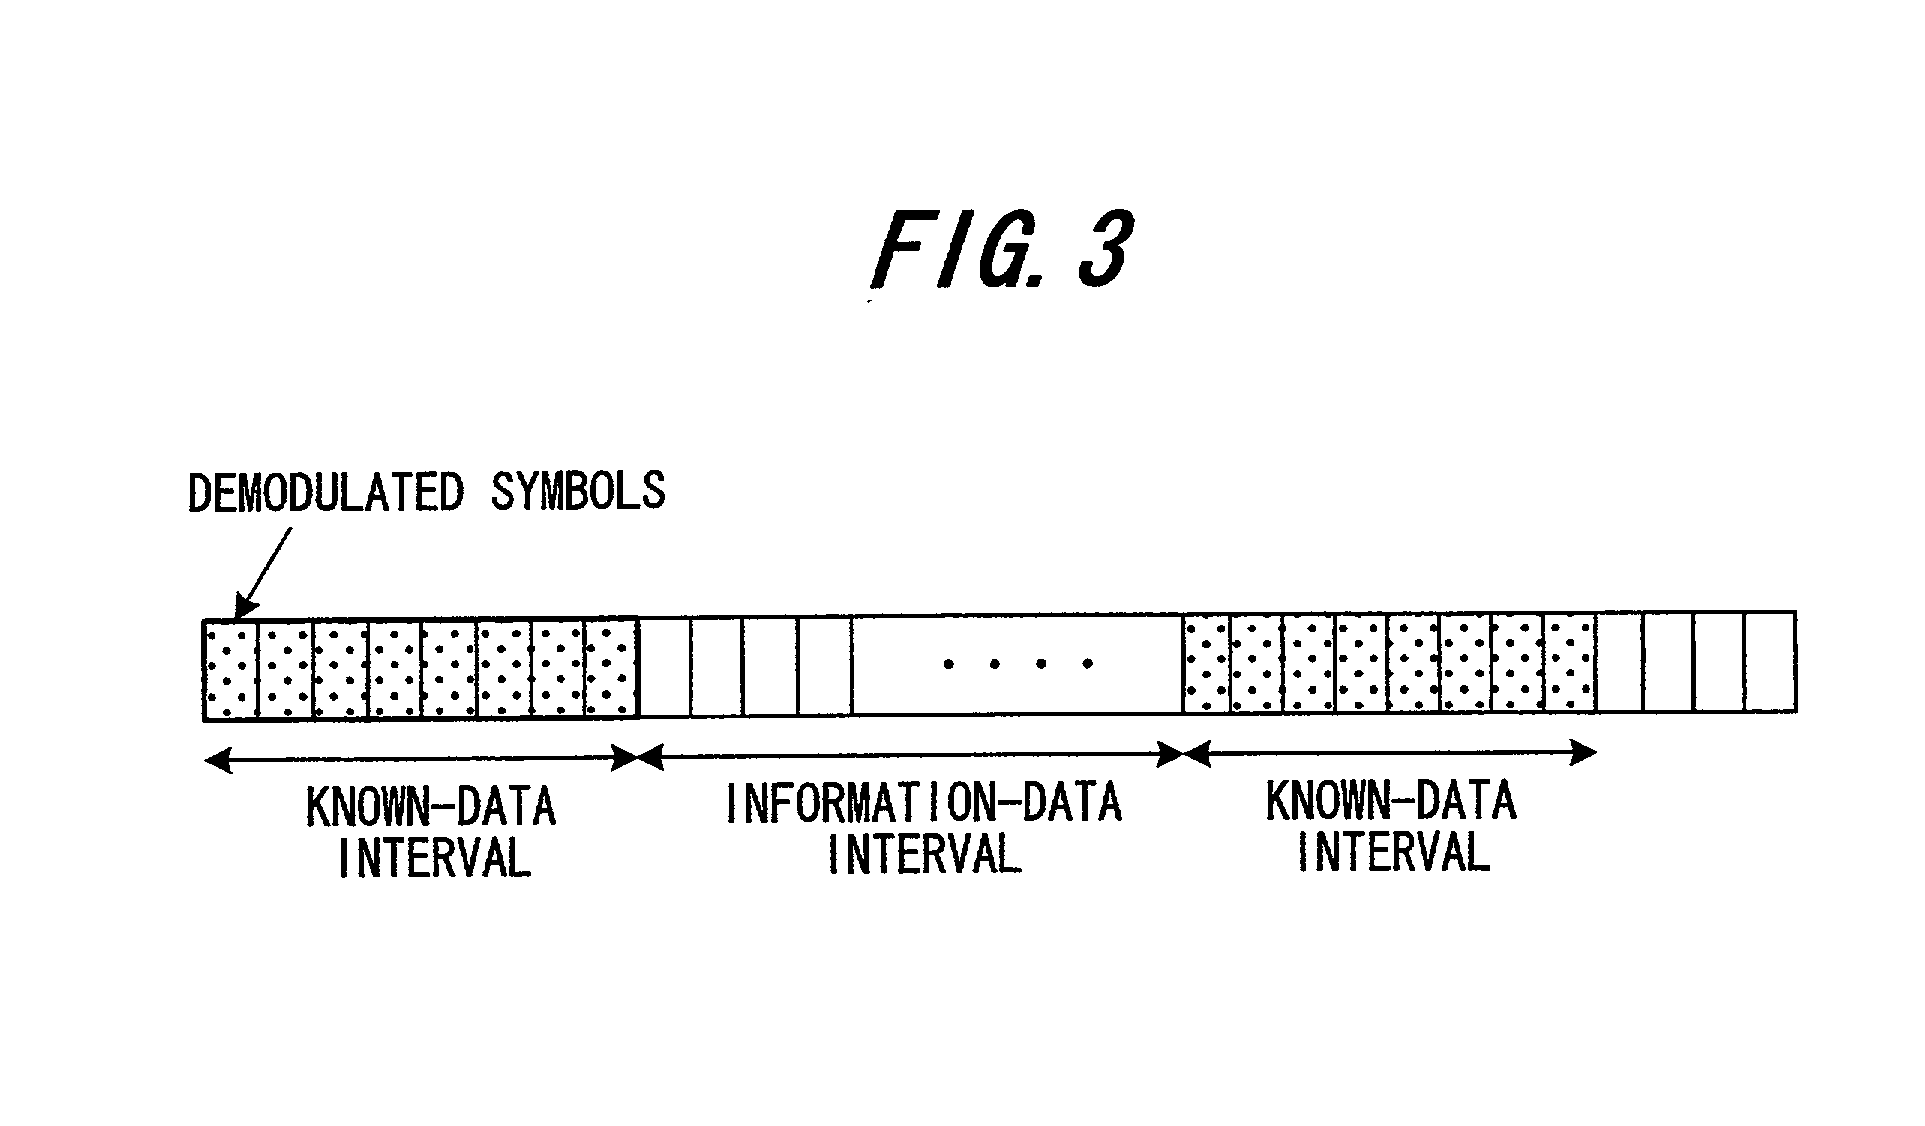 Mobile communications receiving apparatus and method